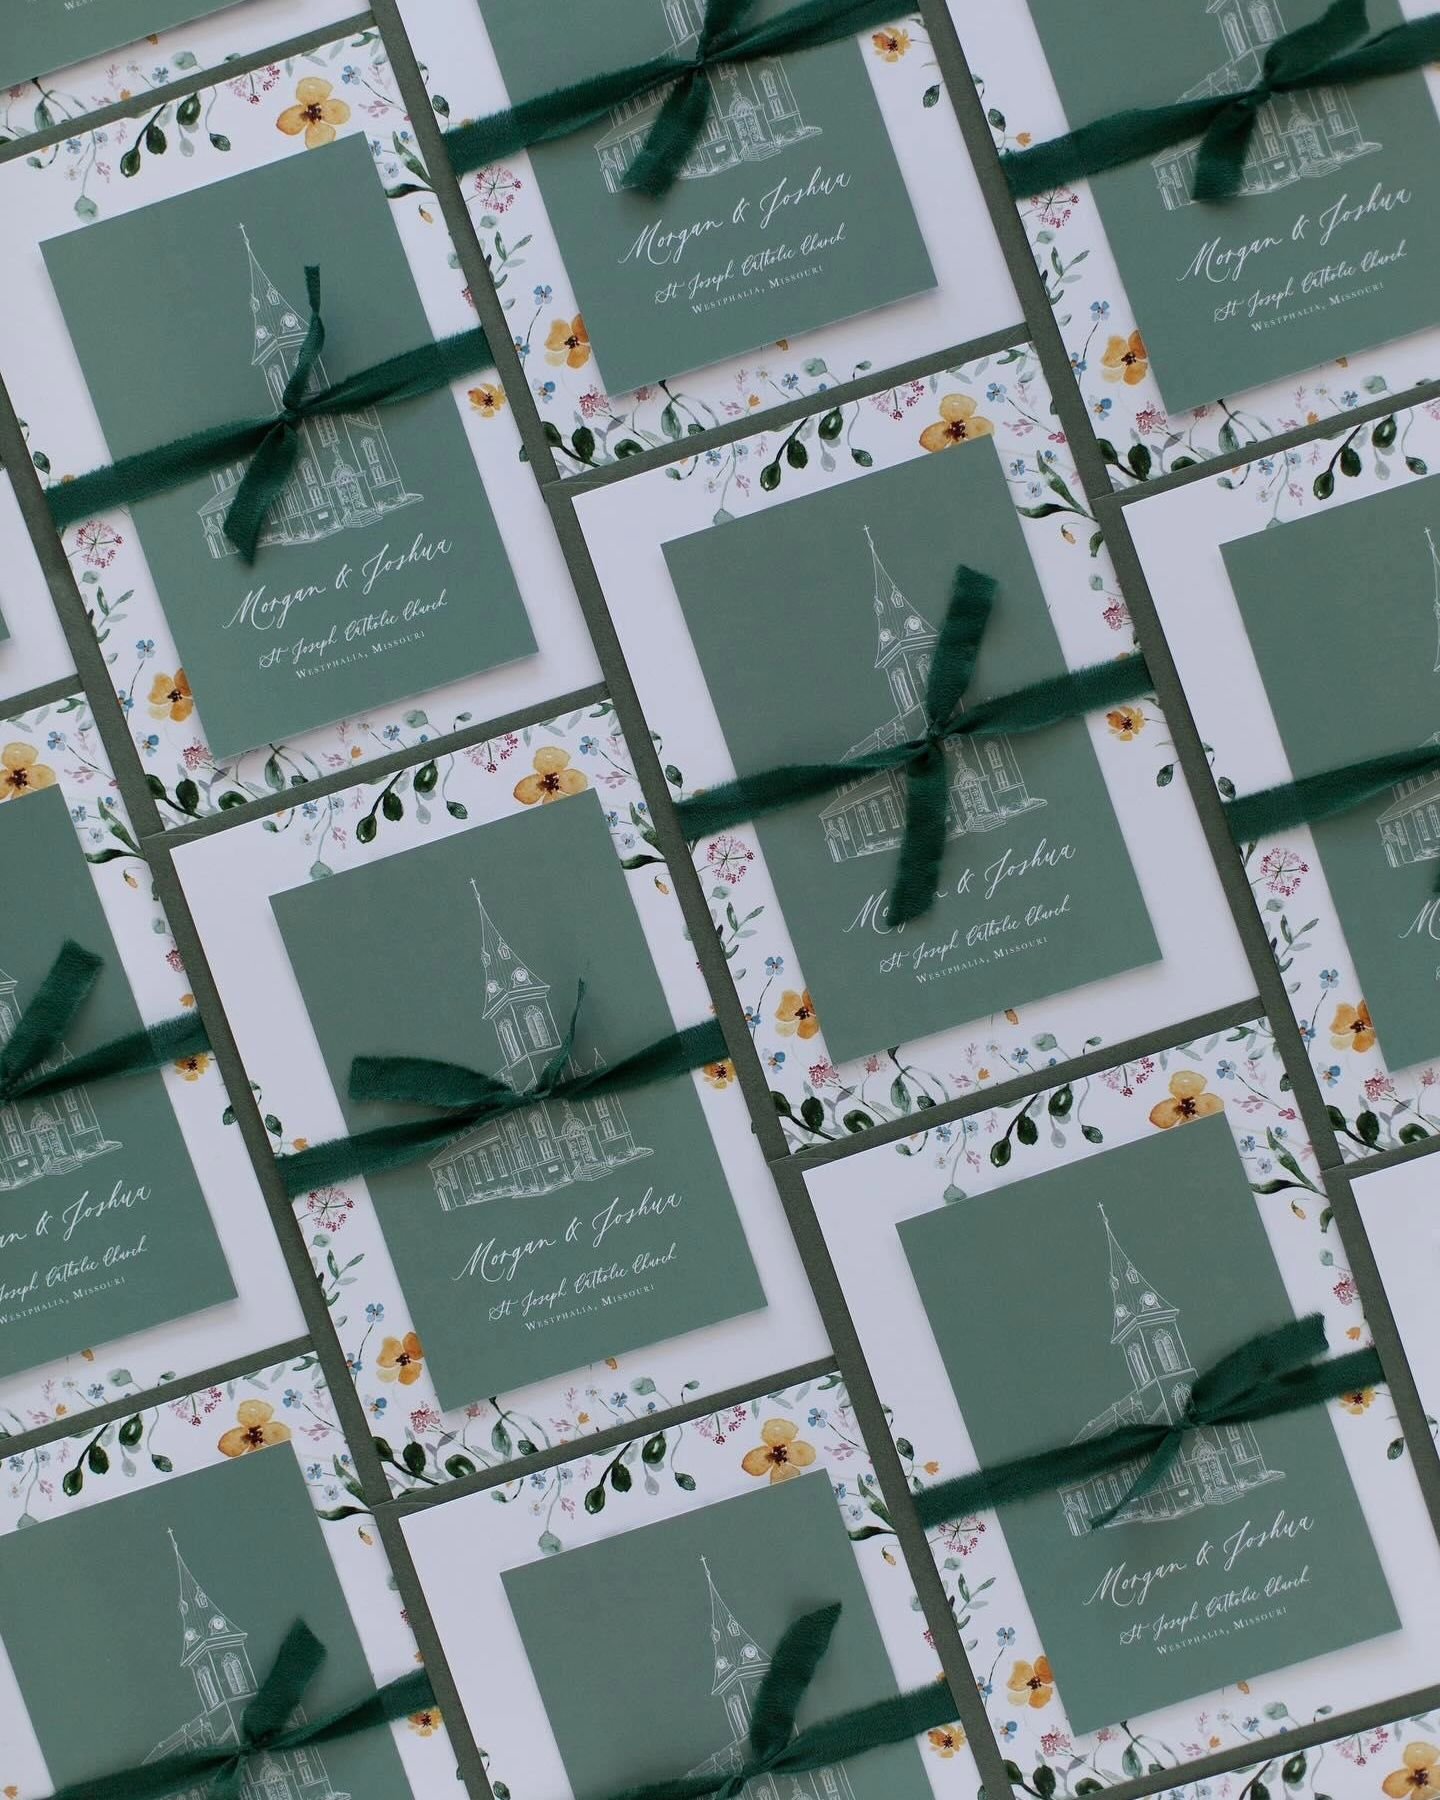 Bespoke wedding invitations are a must for ensuring every detail of your big day is unforgettable, seamlessly tying into your overall wedding design. It's about adding that extra layer of intention and beauty to honor the significance of your wedding